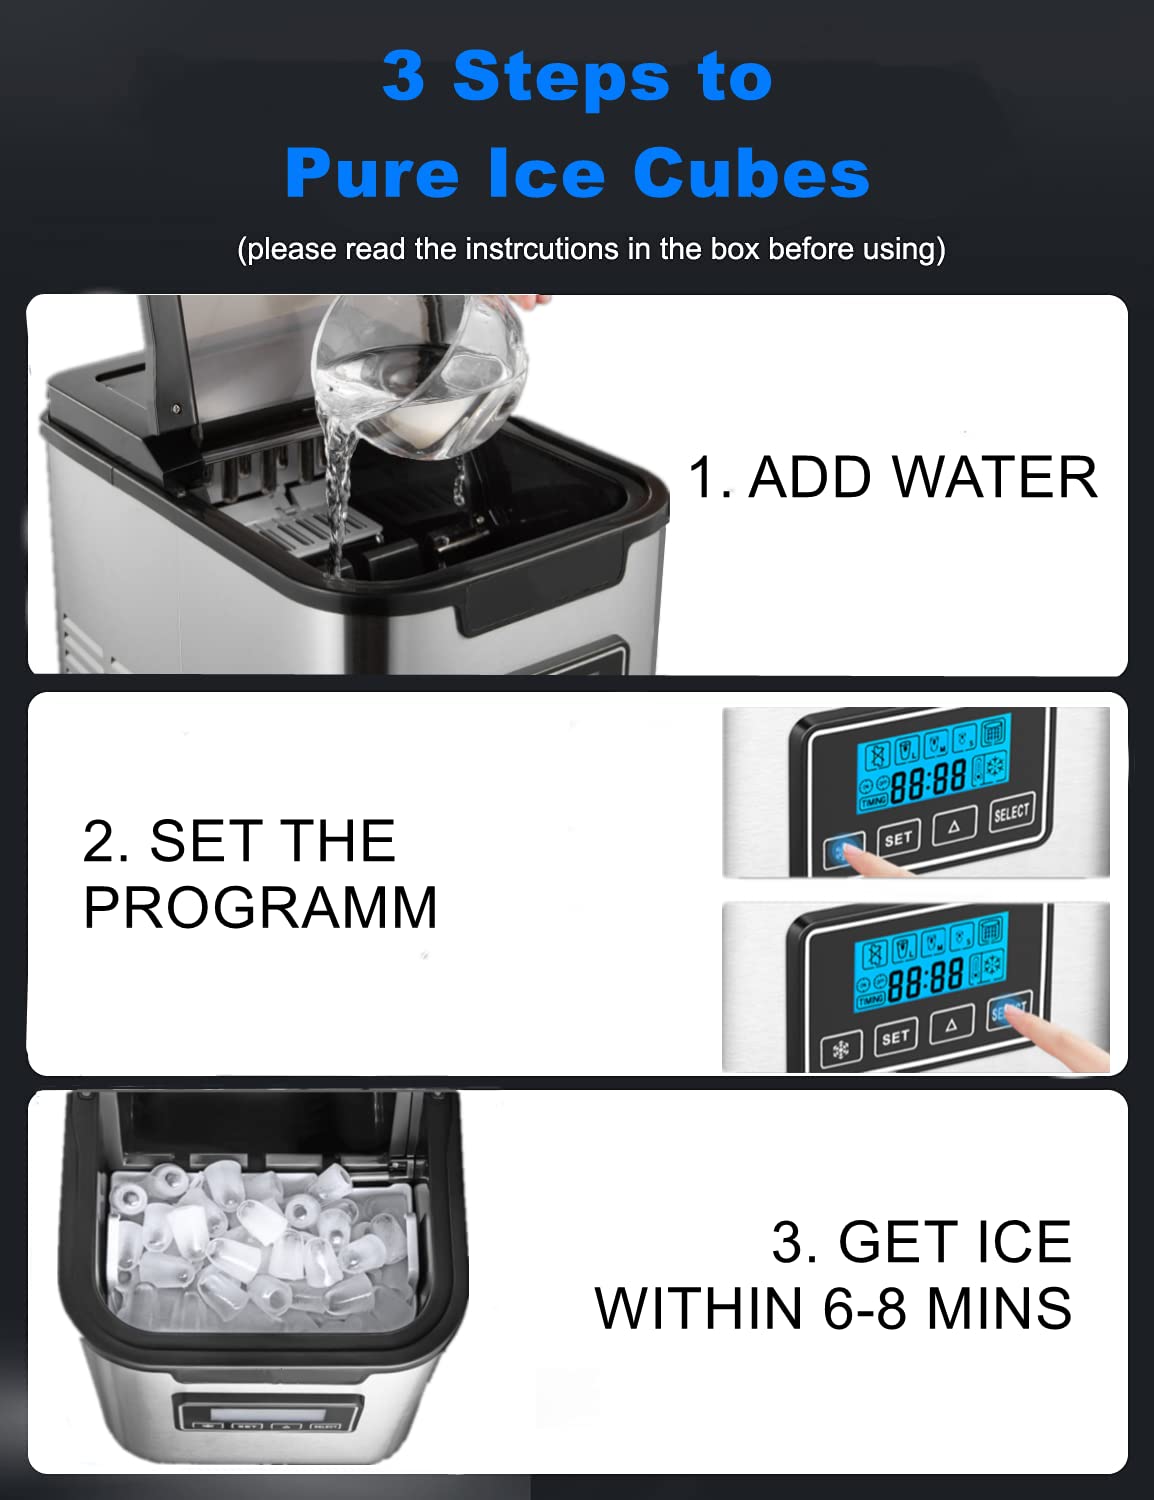 Ice Maker Machine Self Clean, 3 Size S/M/L, 13 KG / 28 lbs Ice in 24 Hrs, 9 Cubes in 6 Mins Ice Cube Maker, Timer, Ice Scoop, Basket & LED Display, for Home, RV, Kitchen, Office, Bar - Stainless Steel